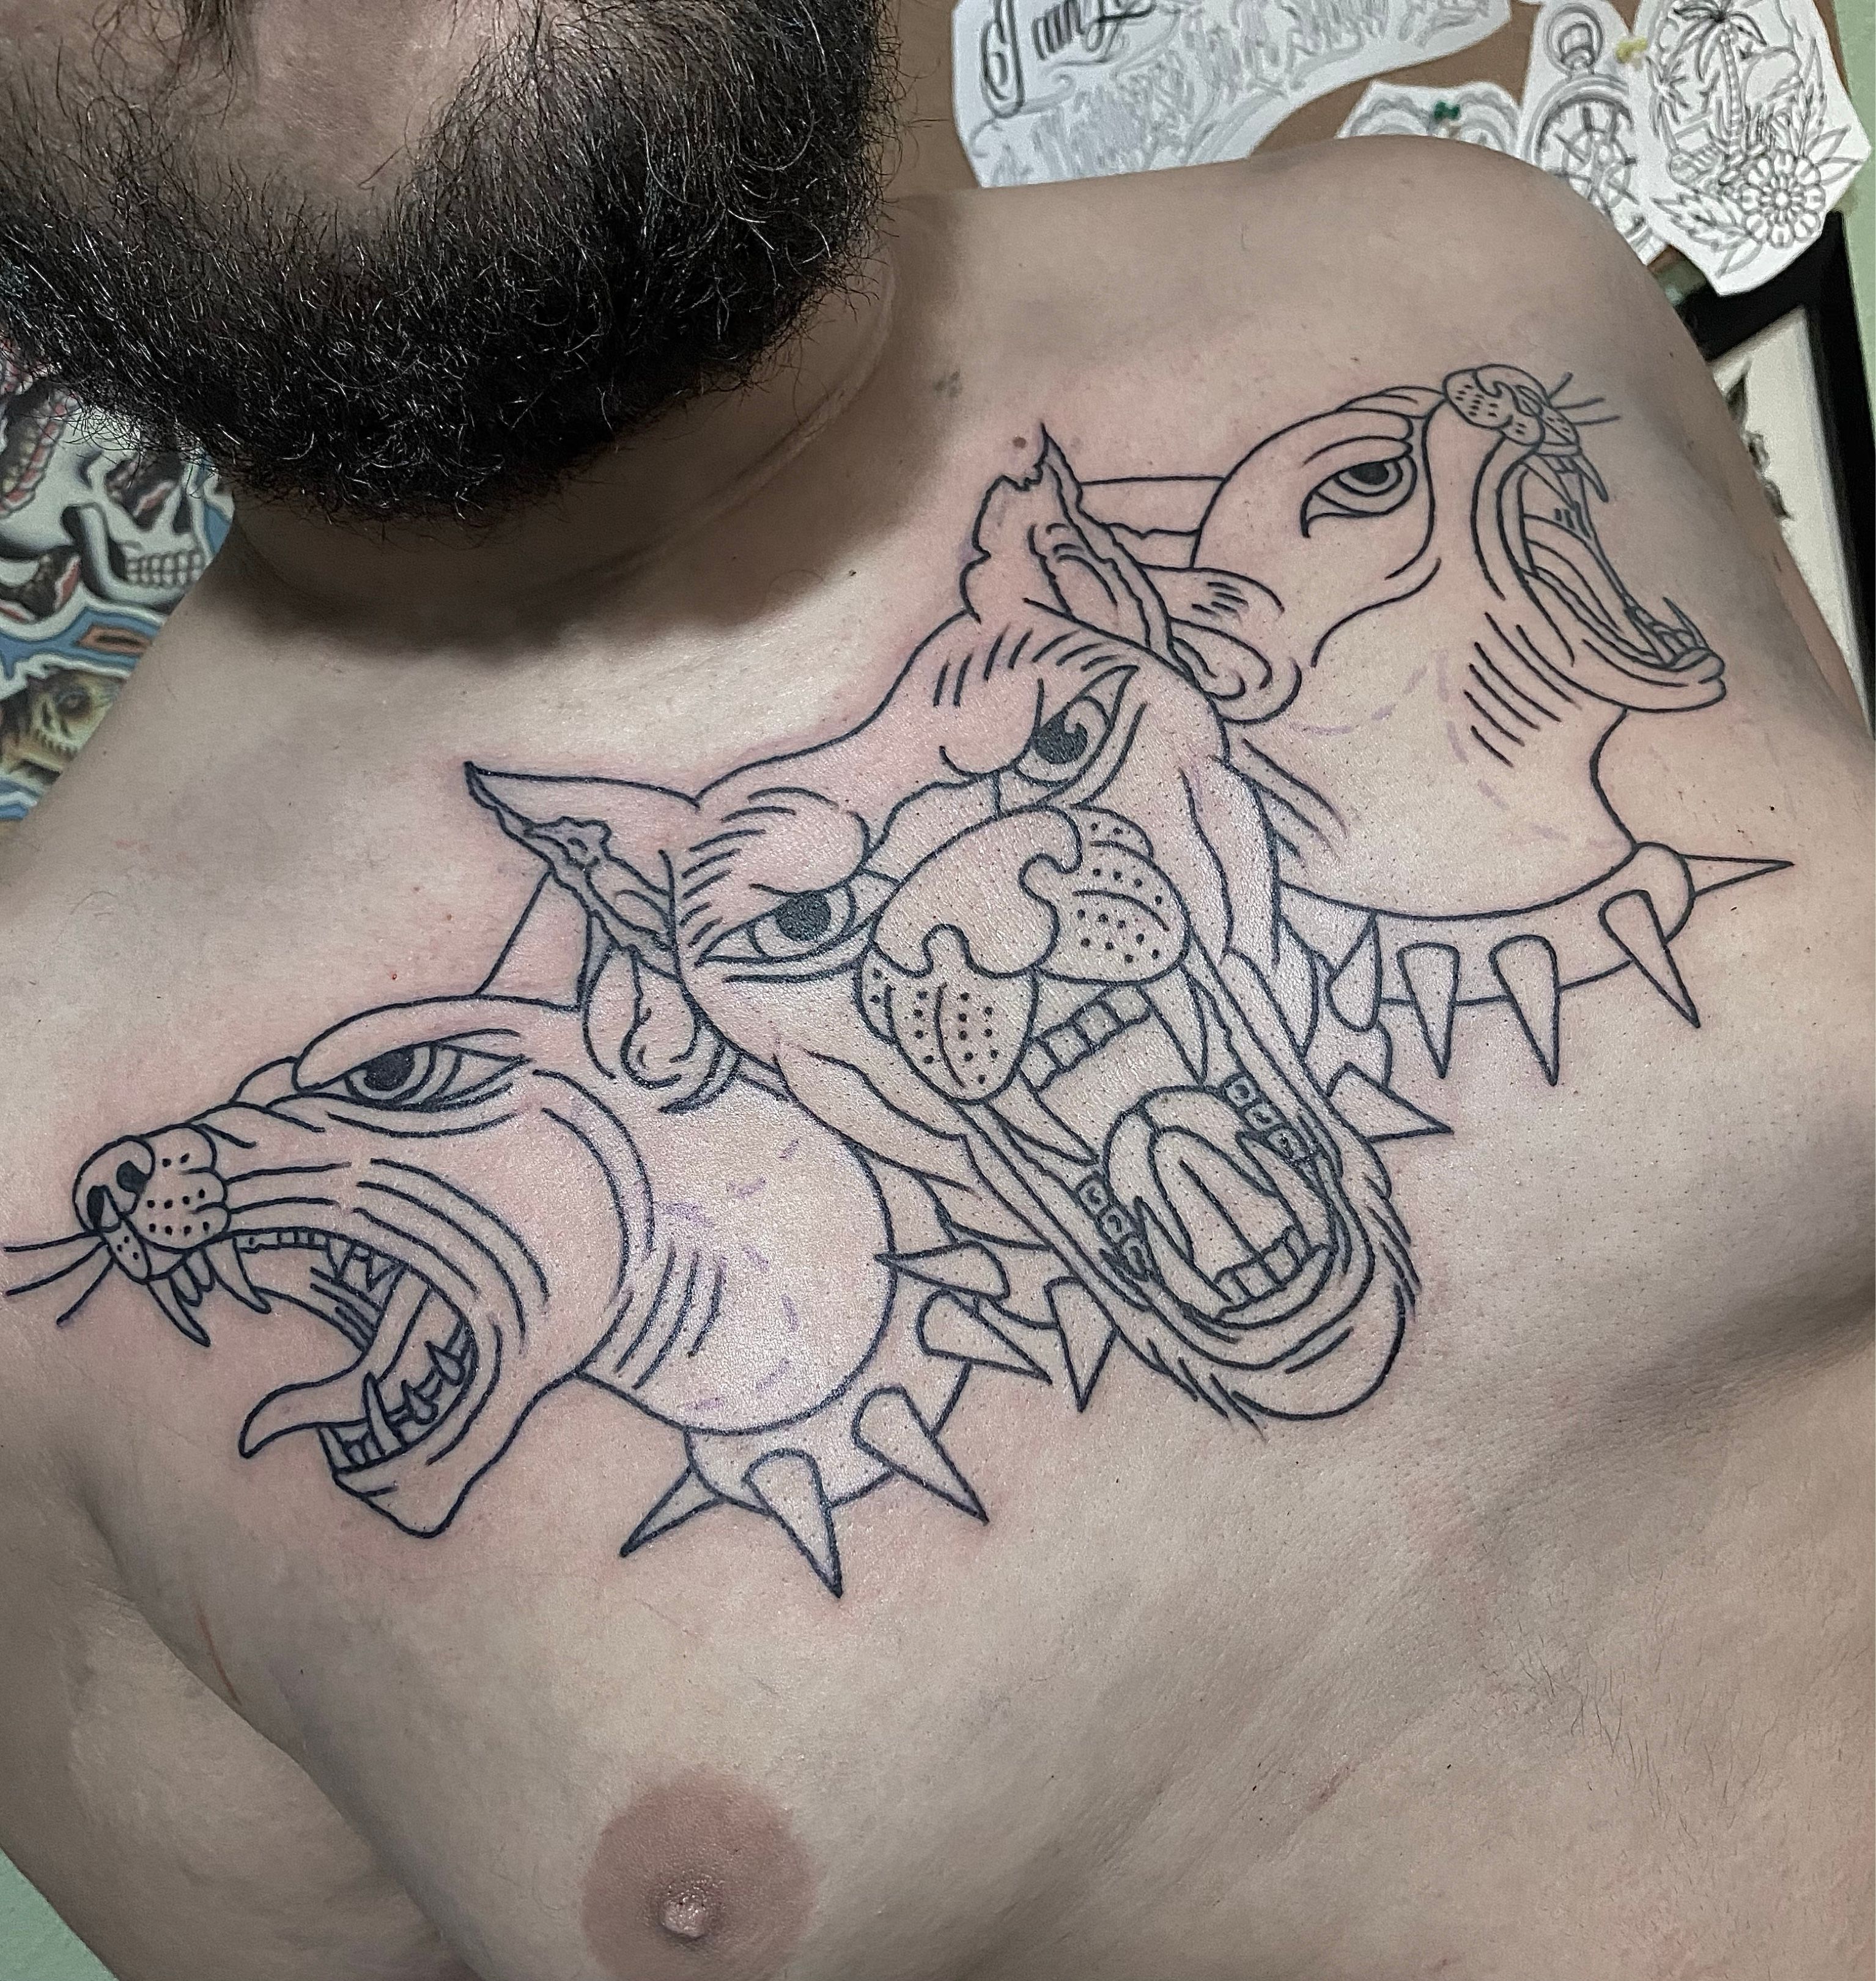 Celtic Cerberus done by Danny argote in Louisville Colorado shop name is  inksmithjust got it done on the 22nd  rtattoos